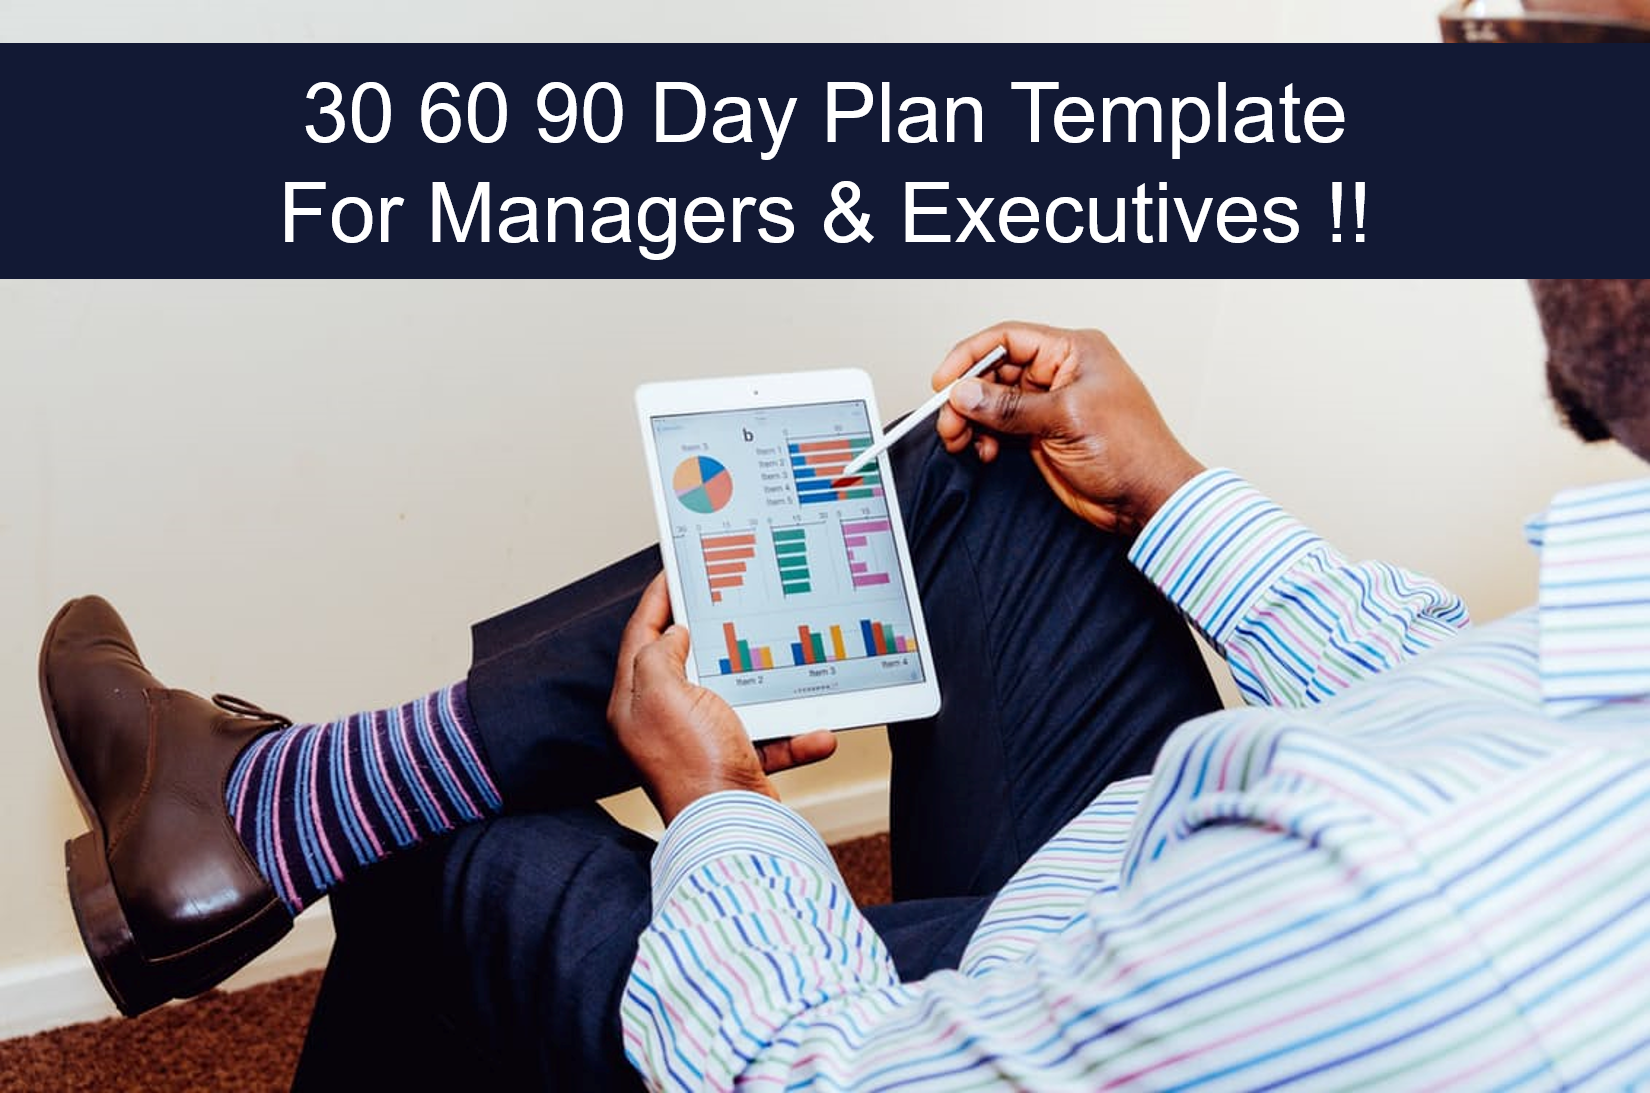 30 60 90 Day Plan Template for Managers